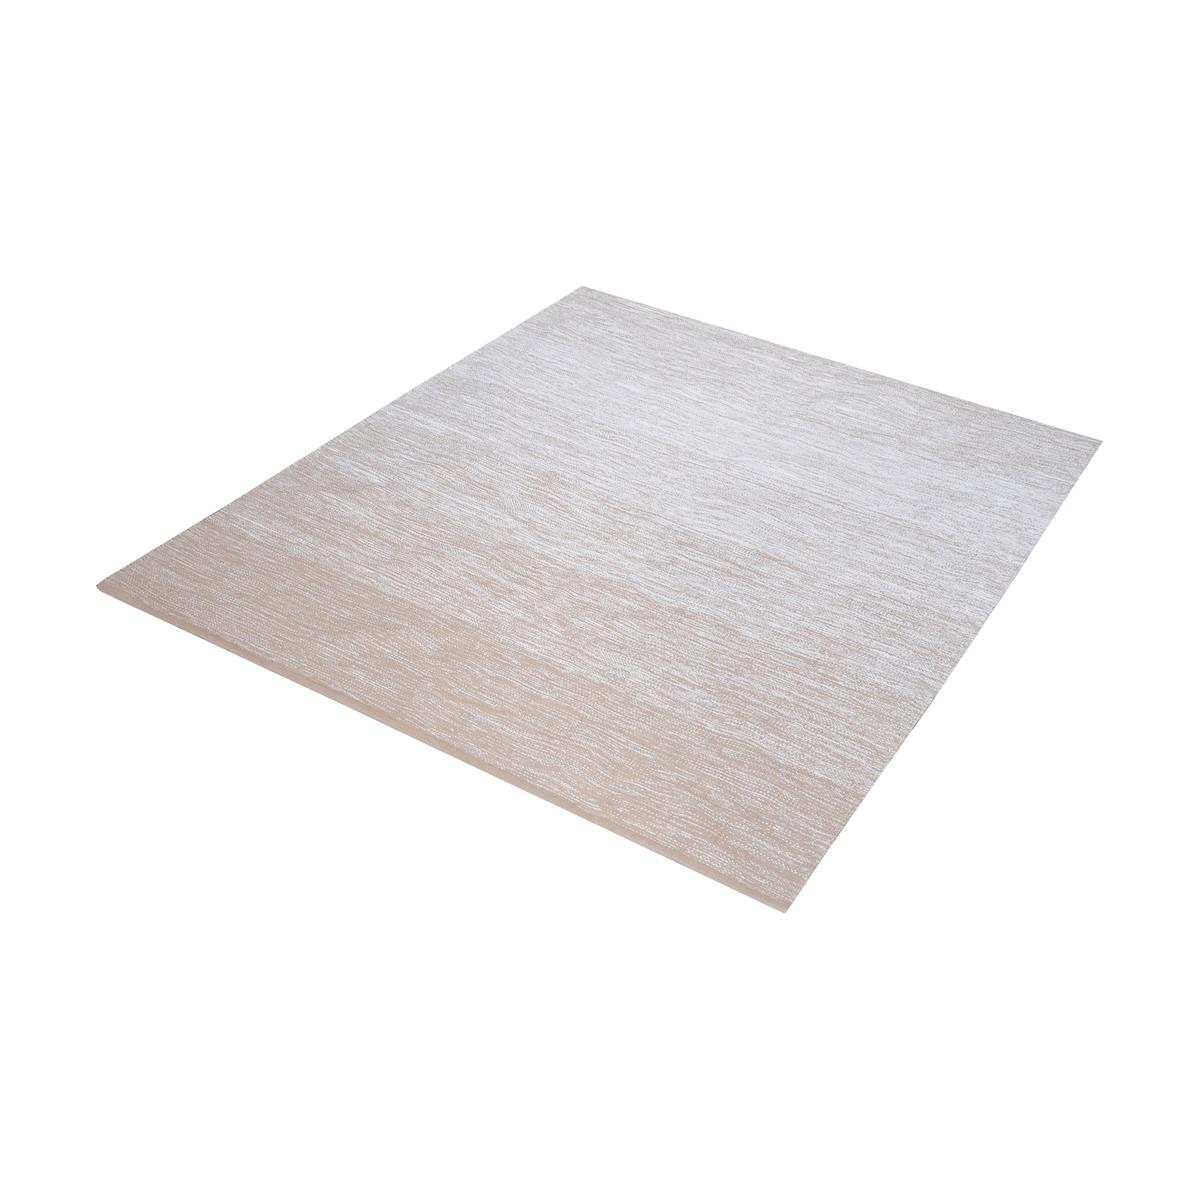 Dimond Home Delight Beige and White 6 in. x 6 in. Square Indoor Area Rug